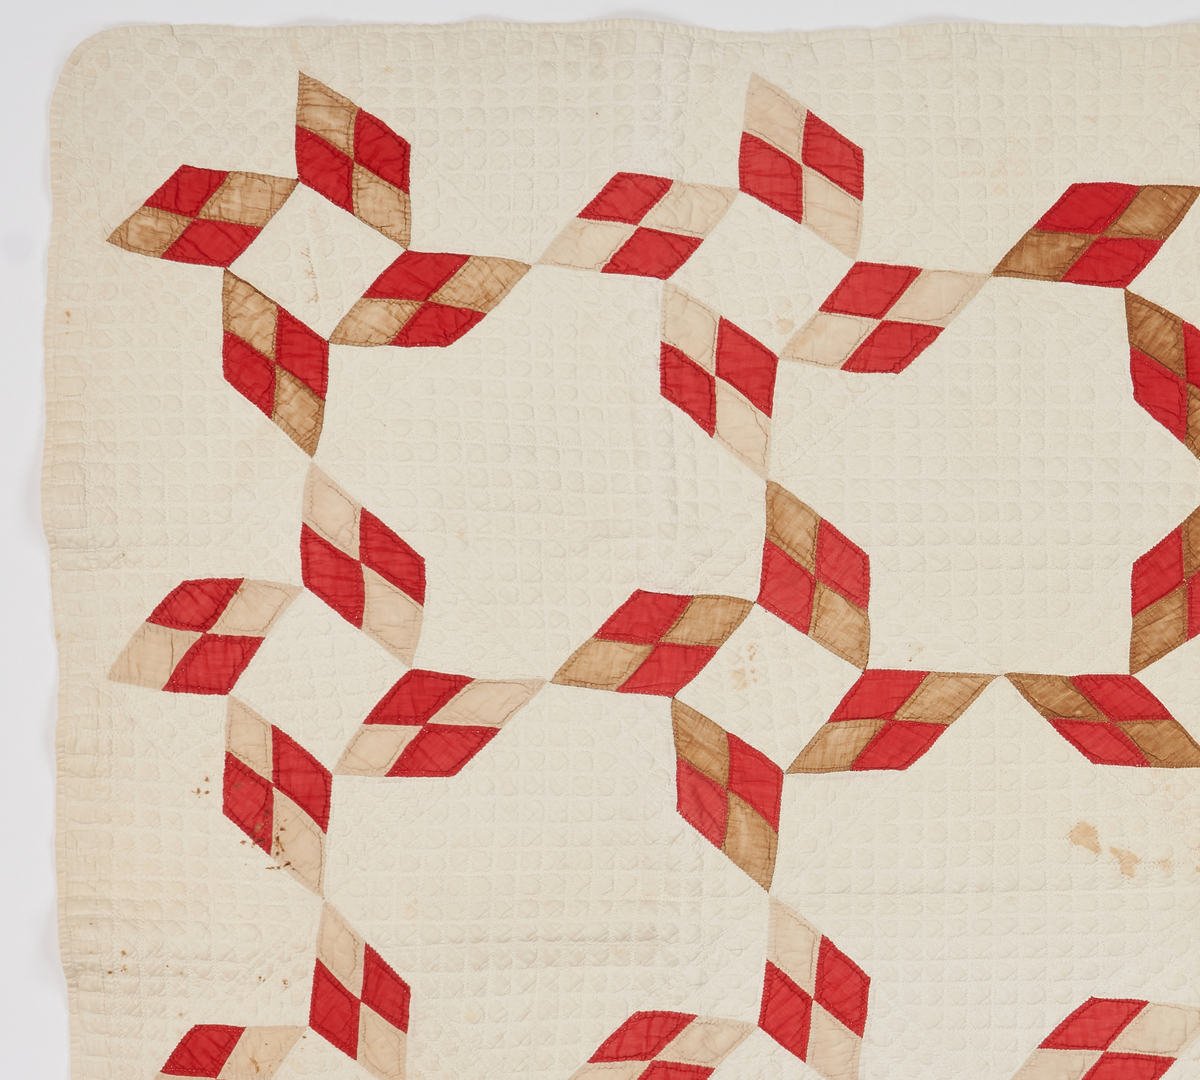 Lot 1139: 2 Southern Quilts incl. White Work Quilt